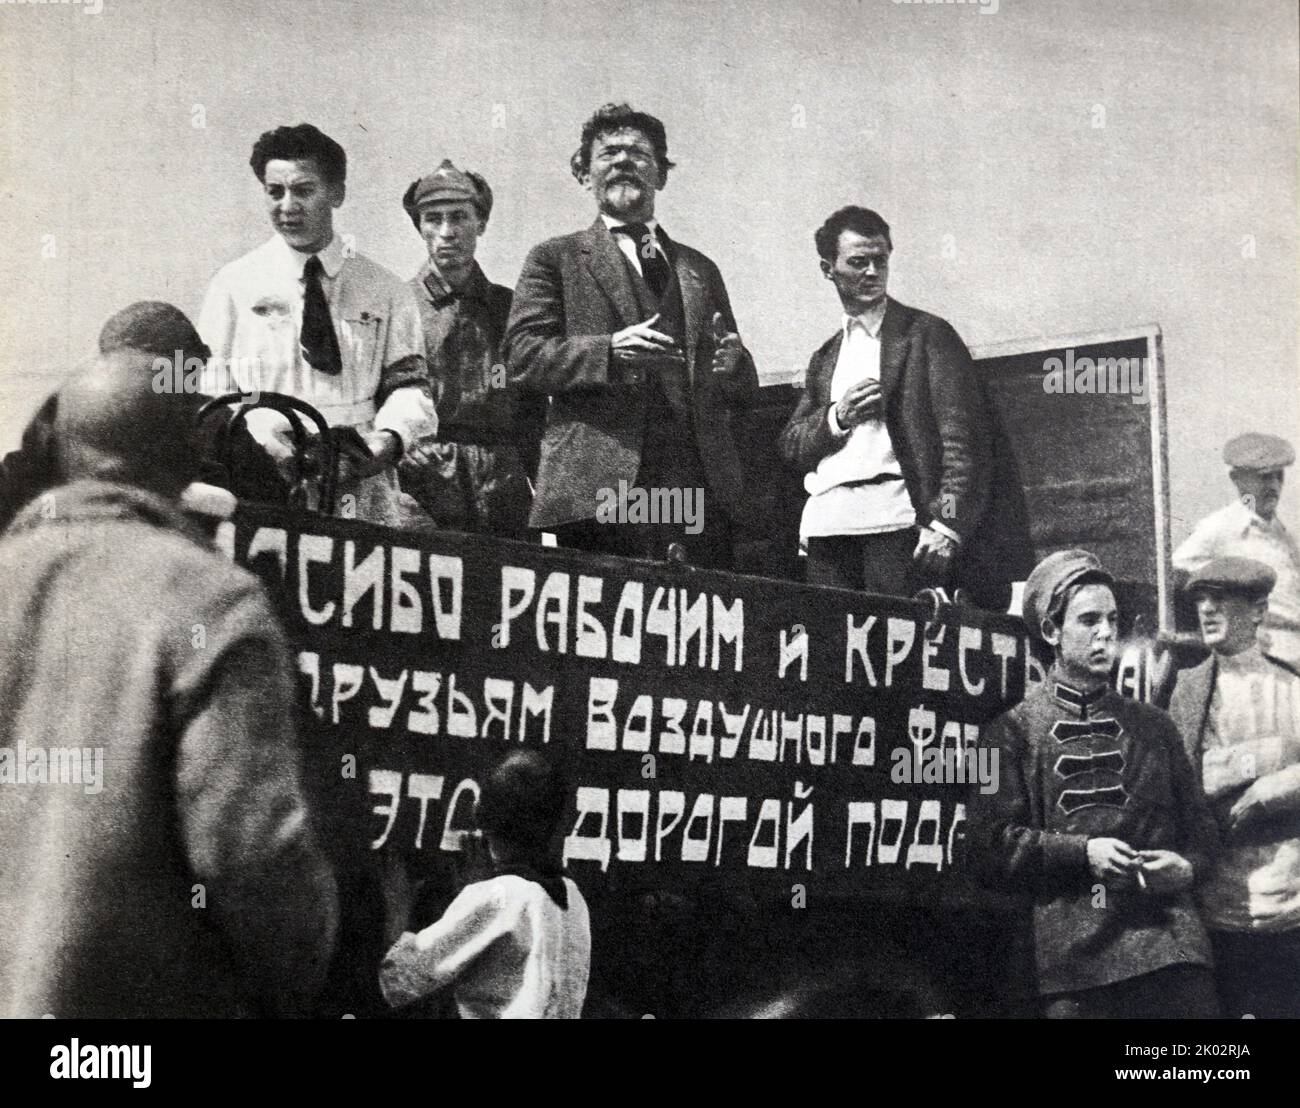 Mikhail Ivanovich Kalinin receives the workers from the first squadron of the Air Fleet of the Land of the Soviets. Moscow, Khodynka. Photo by P. Otsup. Stock Photo